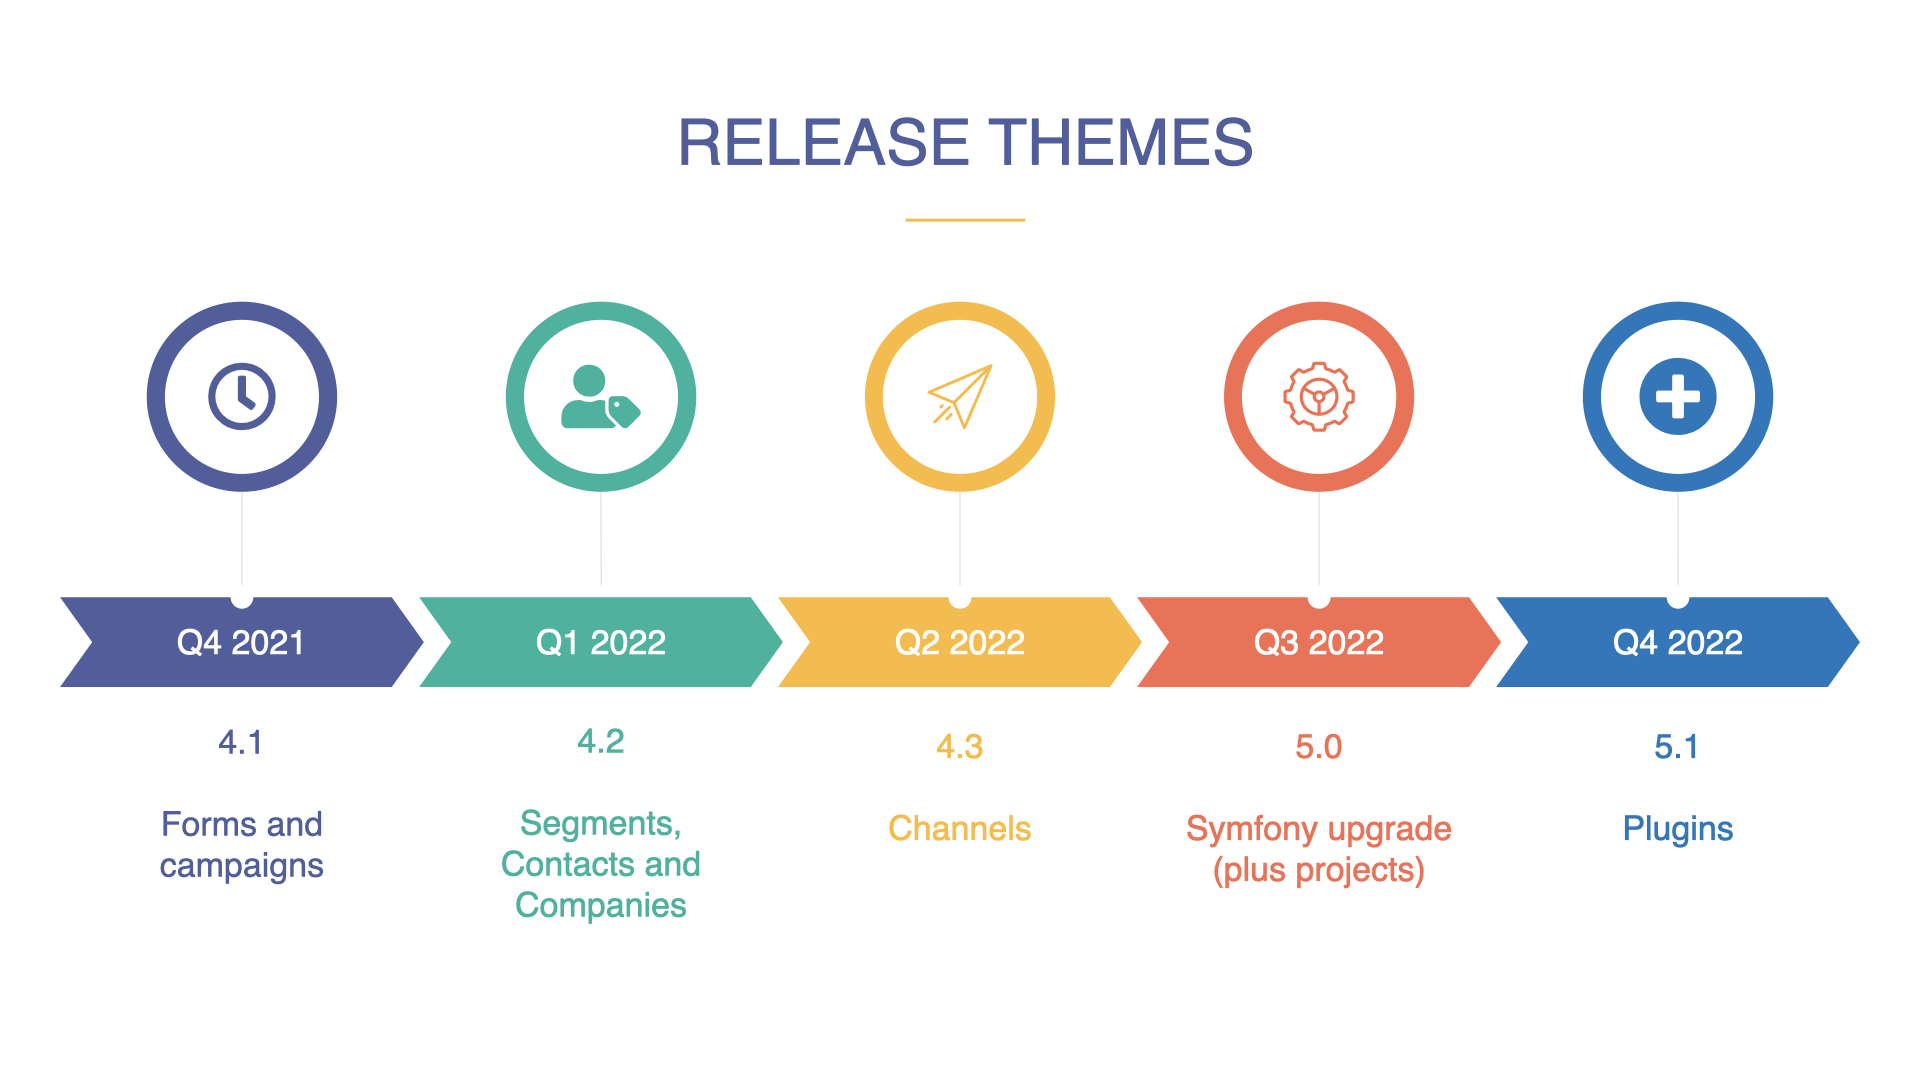 image showing the main themes Q4 2021: Forms and campaigns, Q1 2022: Segments, Contacts and Companies; Q2 2022: Channels; Q3 2022: Symfony upgrade and projects; Q4 2022: Plugins